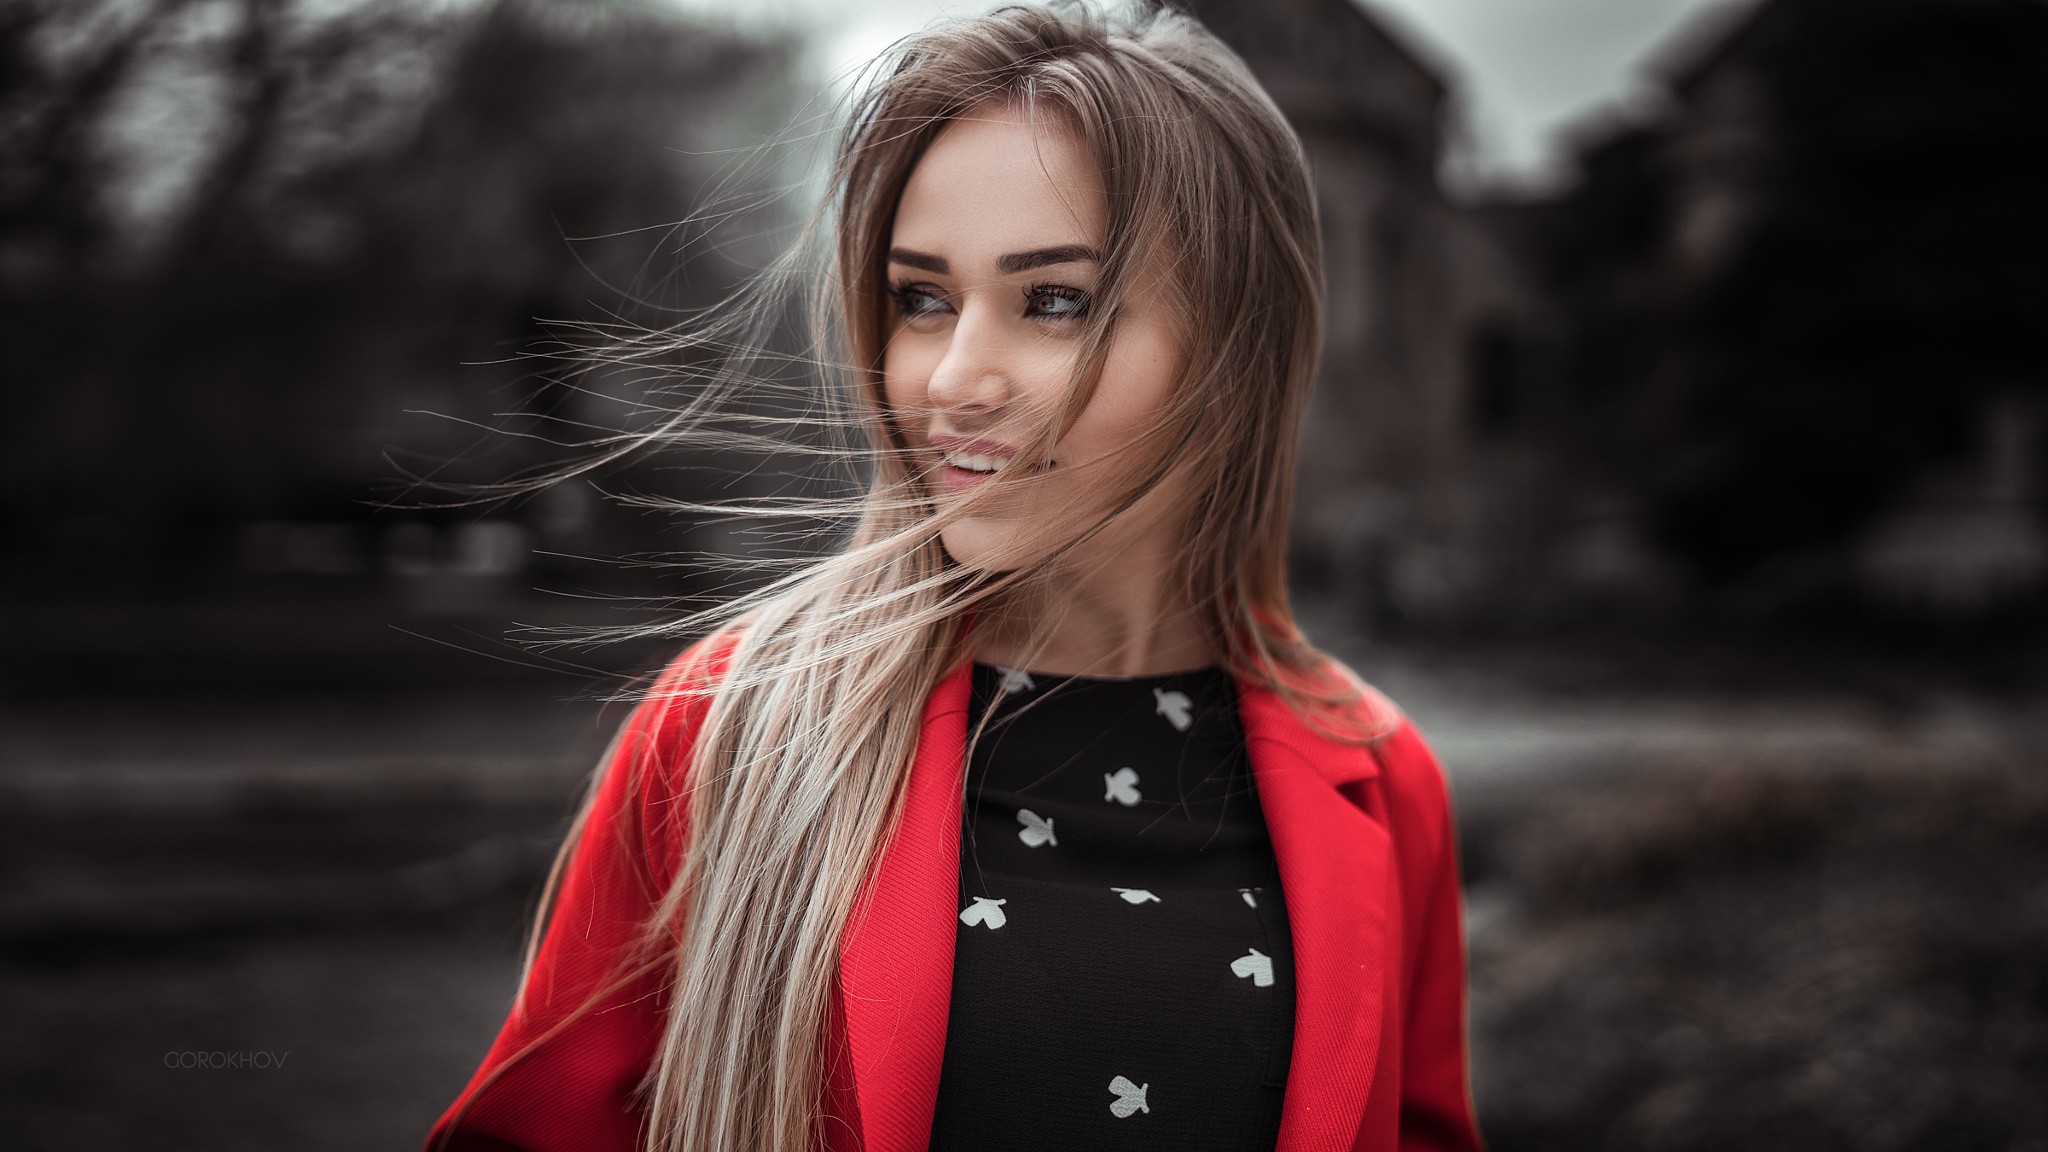 Women Blonde Smiling Face Portrait Looking Away Ivan Gorokhov Maria Puchnina Red Coat Hair In Face L 2048x1152